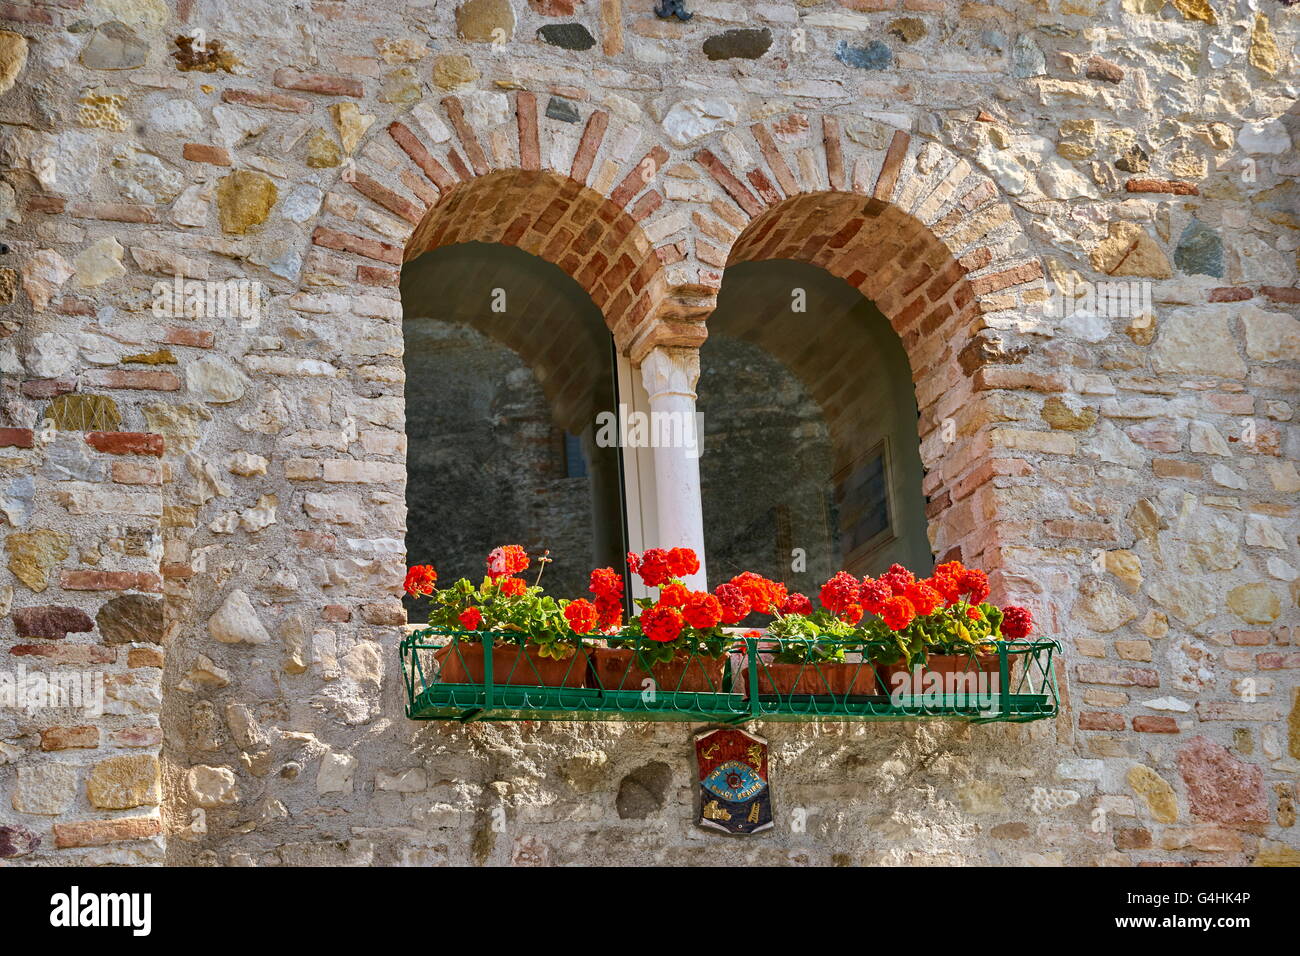 Window and red flowers, Sirmione old town, Garda Lake, Lombardy, Italy Stock Photo